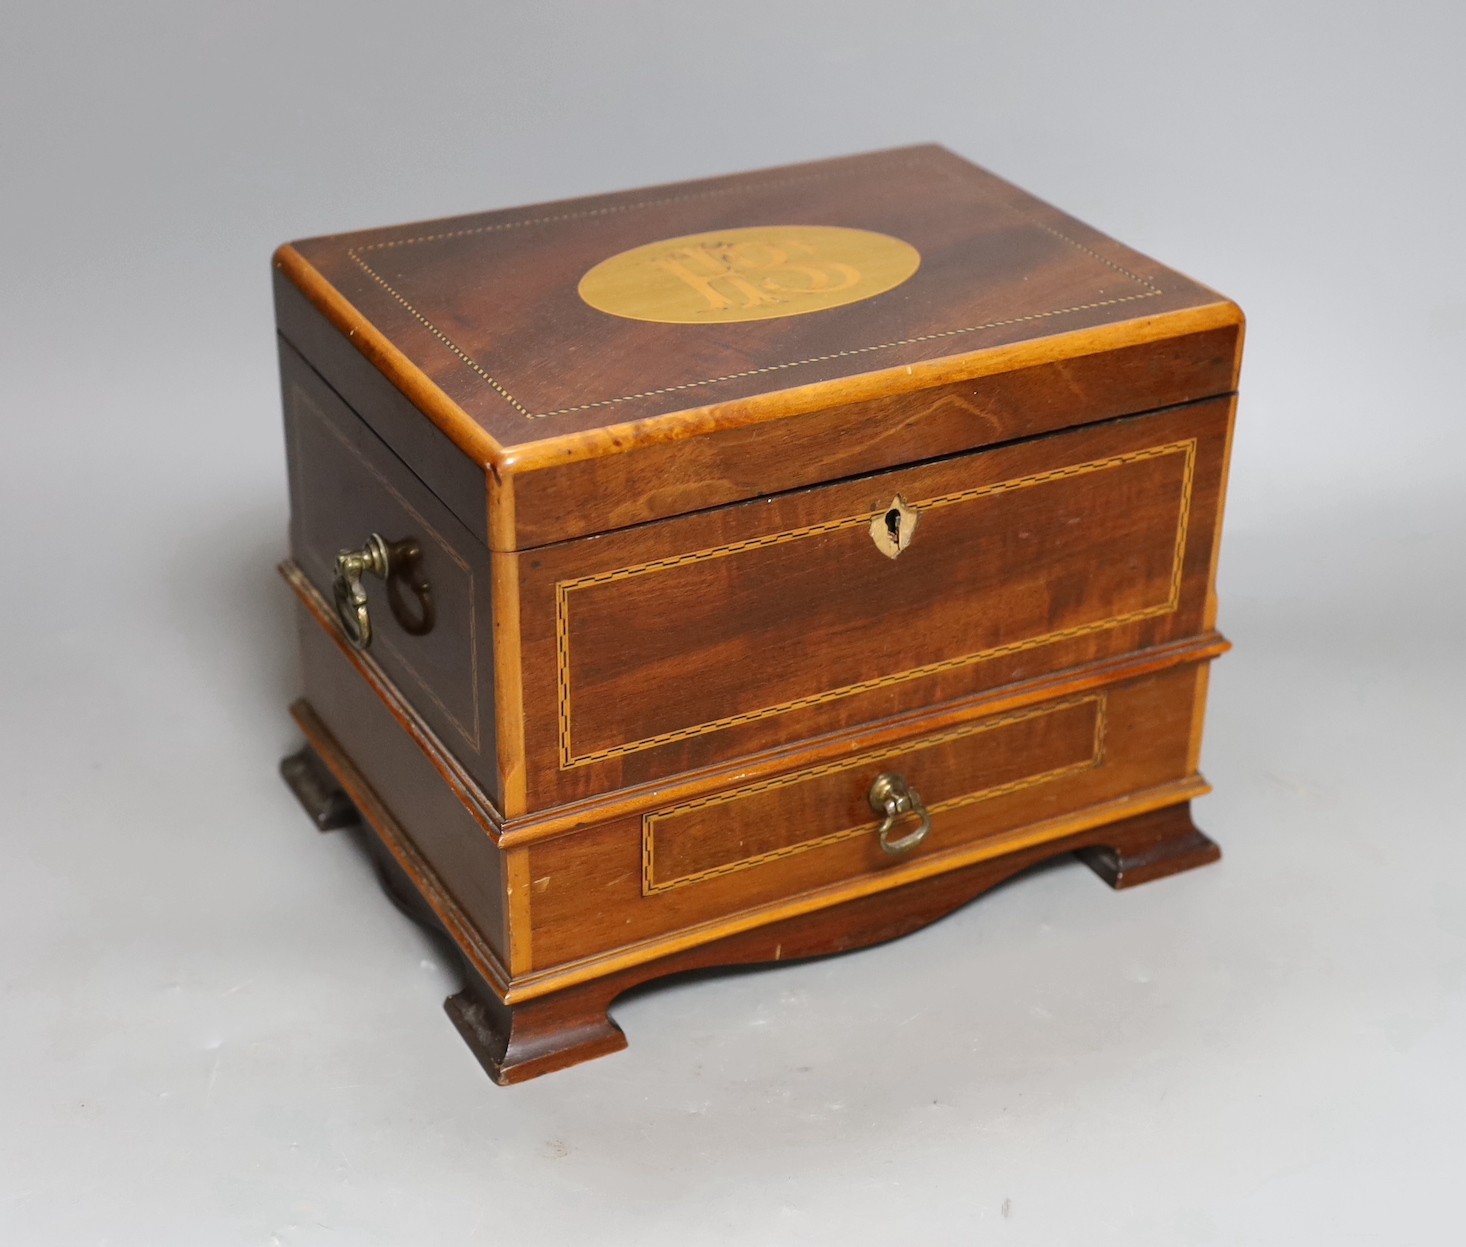 A mahogany jewellery casket with inlaid decoration. 16cm tall